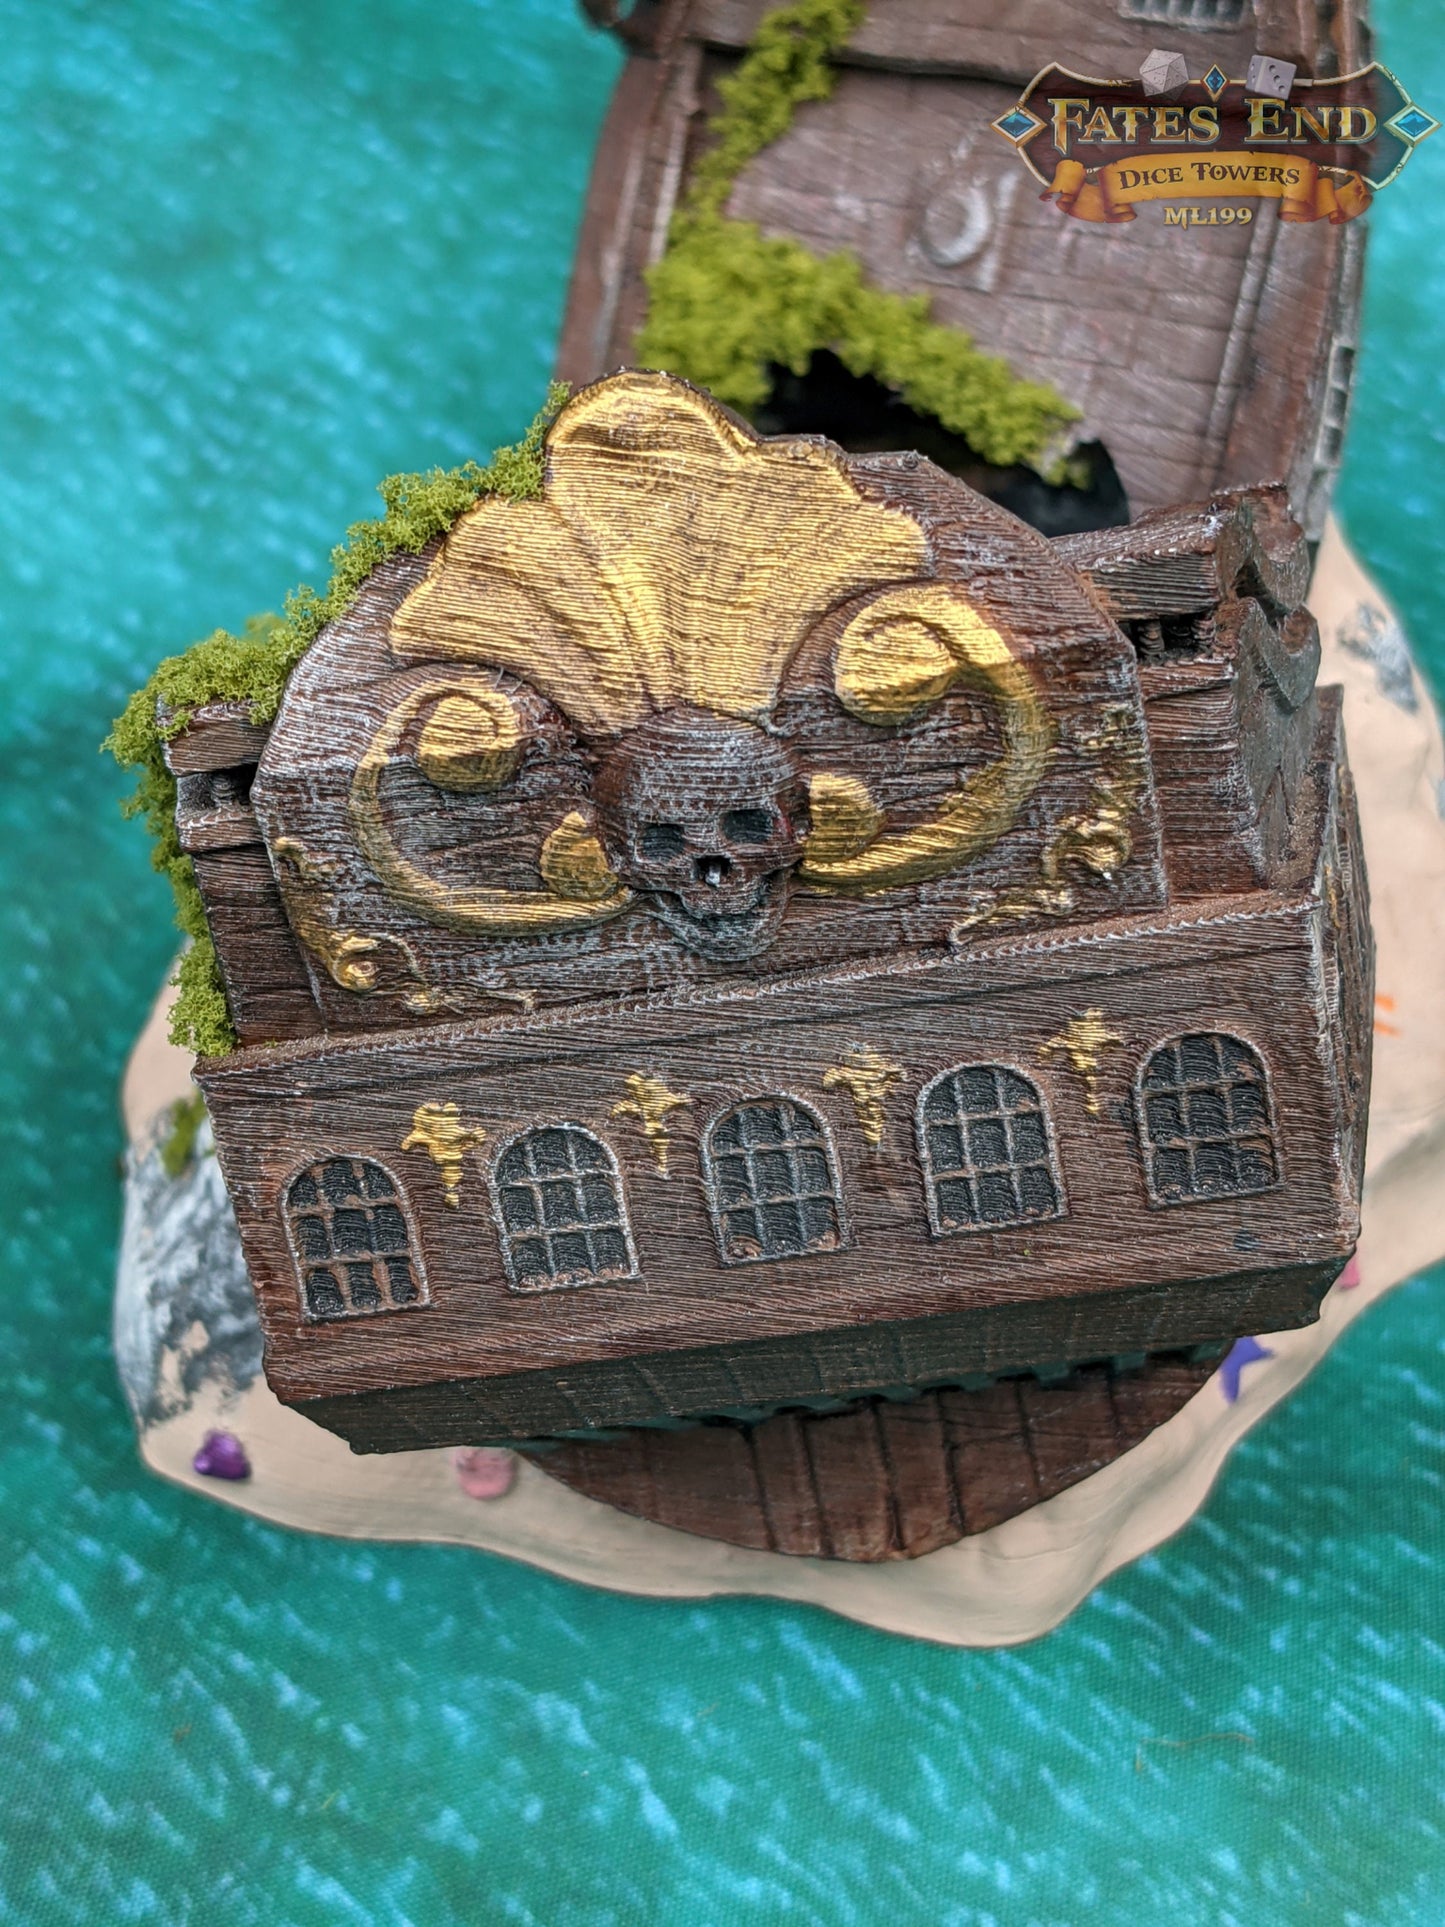 Pirate Ship 3D Printed Dice Tower - Fate's End Collection - Tabletop RPG Gaming Fantasy Cosplay - Sail Uncharted Waters of Fate in Flair .